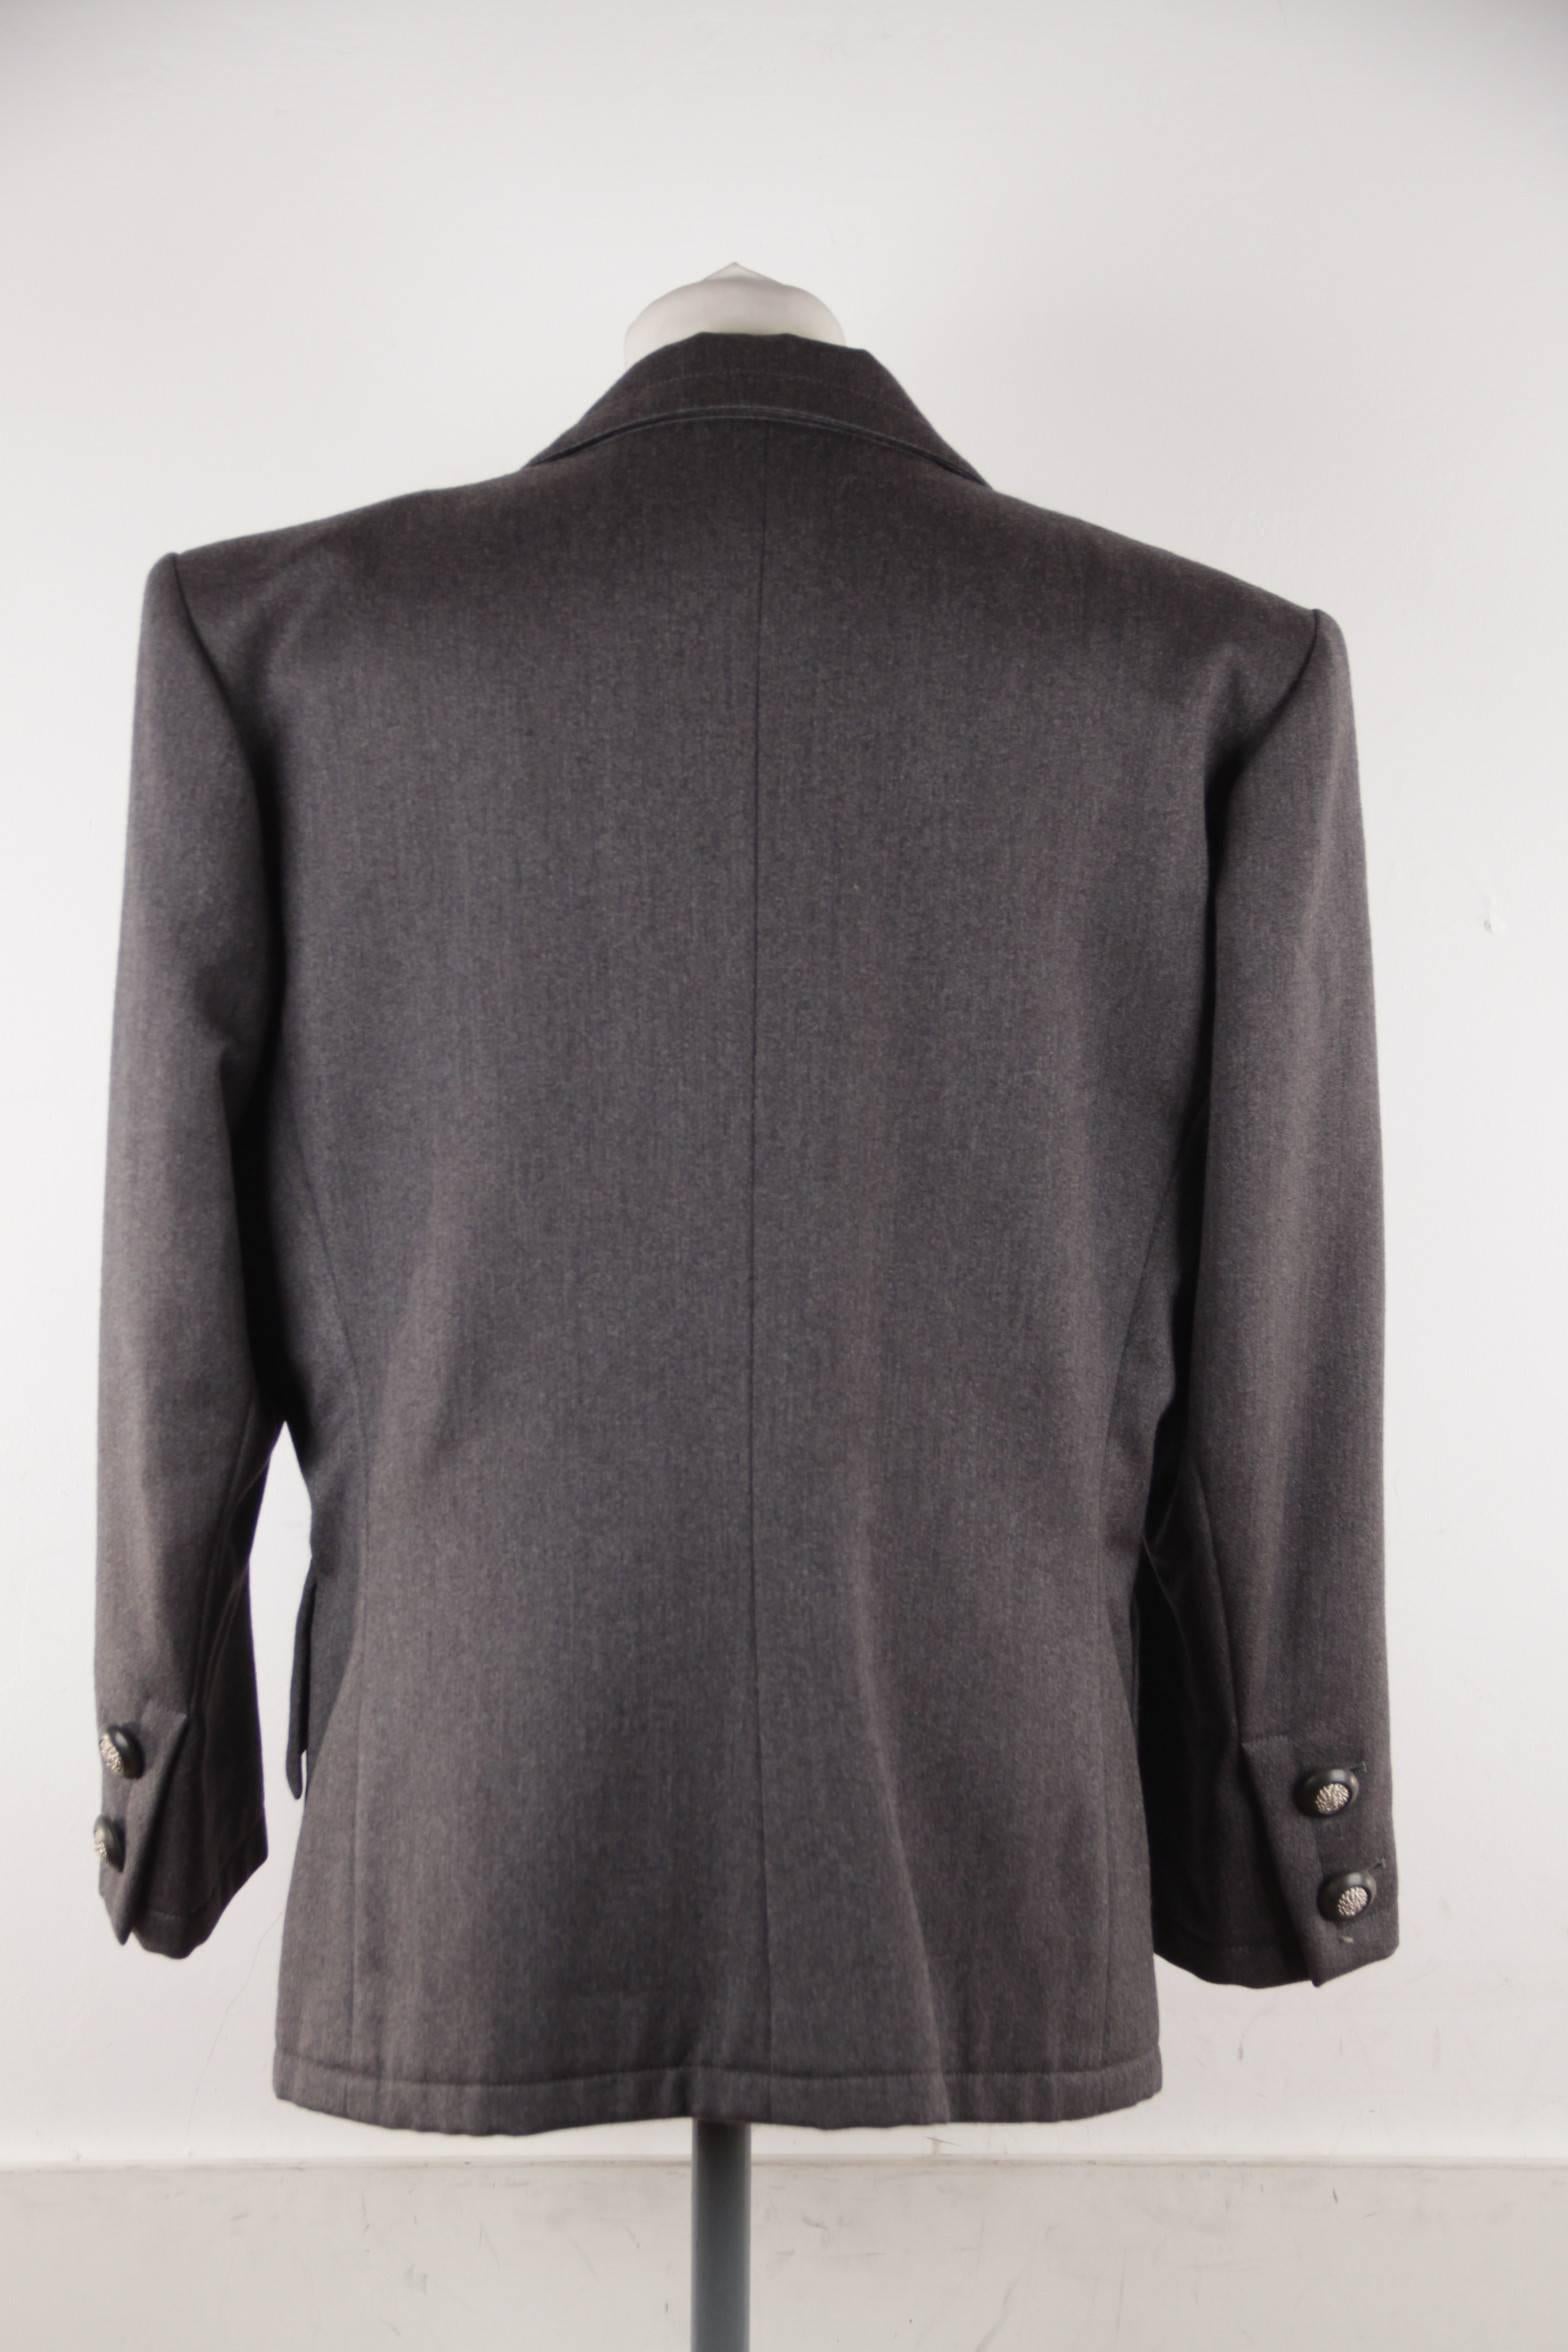 SAINT LAURENT RIVE GAUCHE Vintage Gray Wool BLAZER Jacket SIZE 44 In Good Condition In Rome, Rome